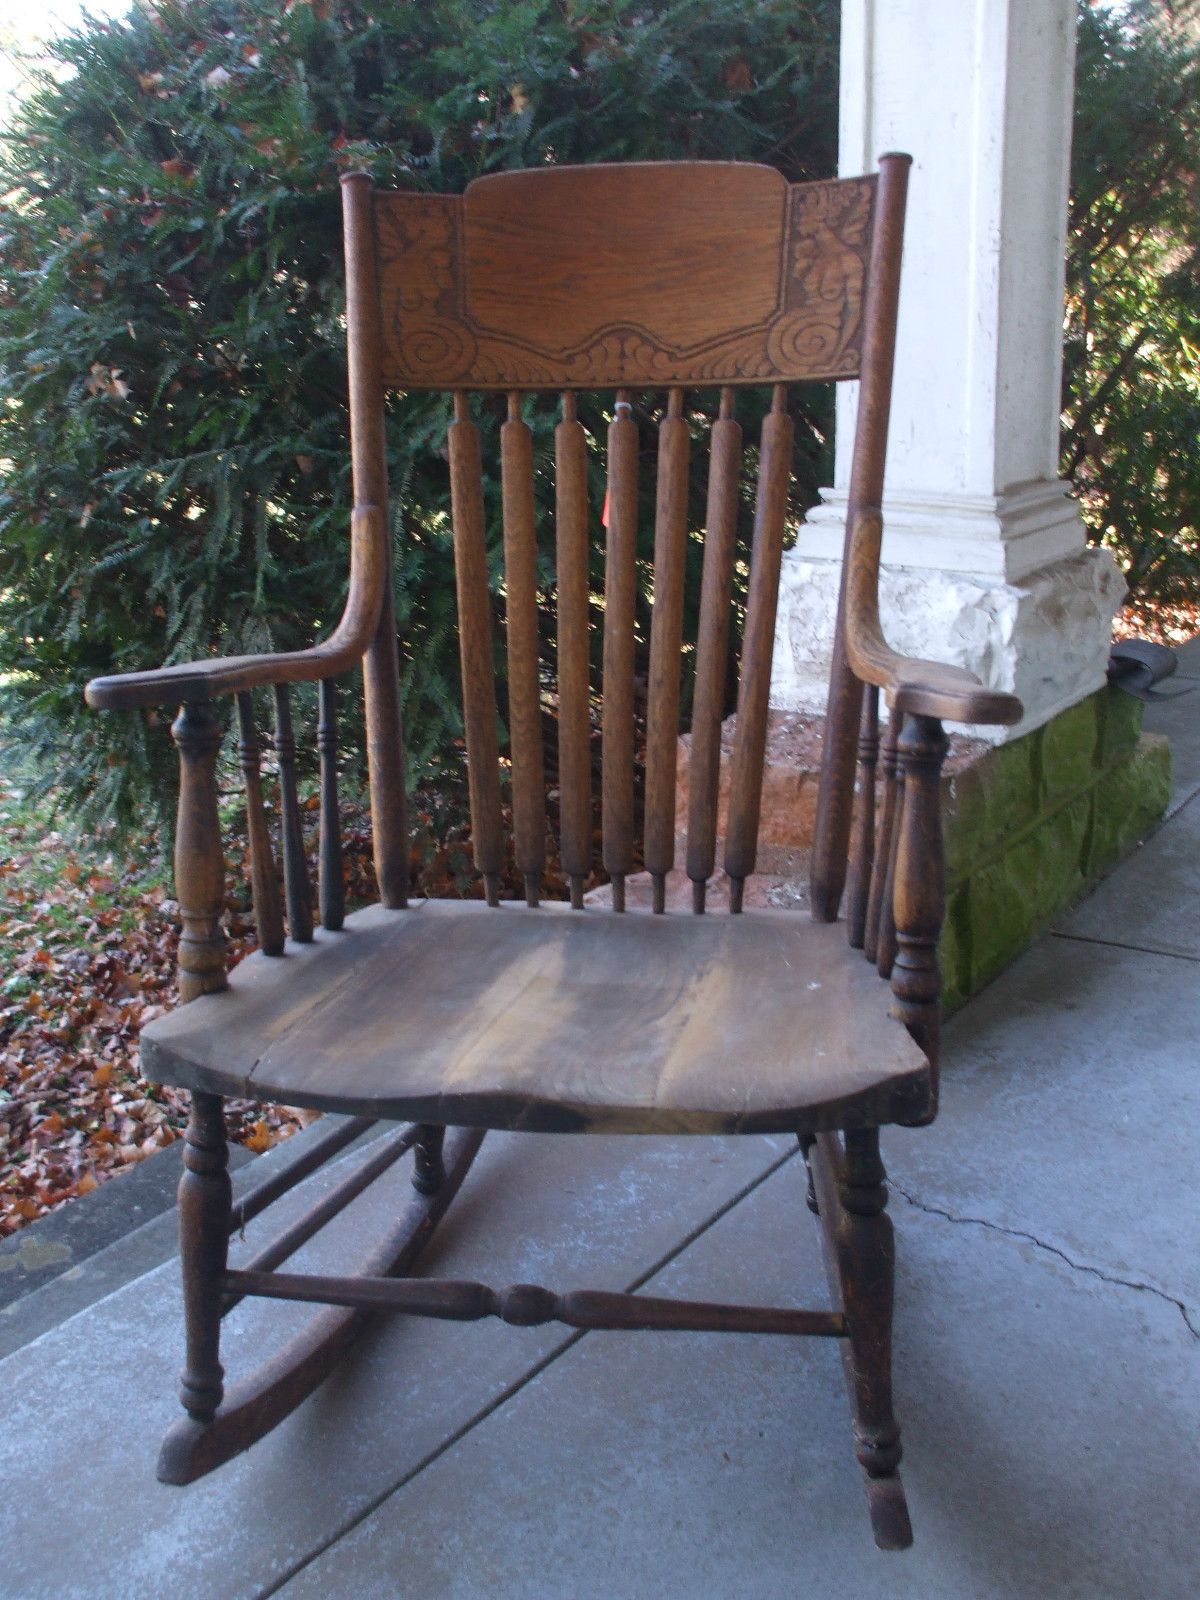 Antique Oak Rocker W/ Mermaid Carvings | Old Wooden Chairs For Oak Carved Rocking Chairs Chairs (View 5 of 20)